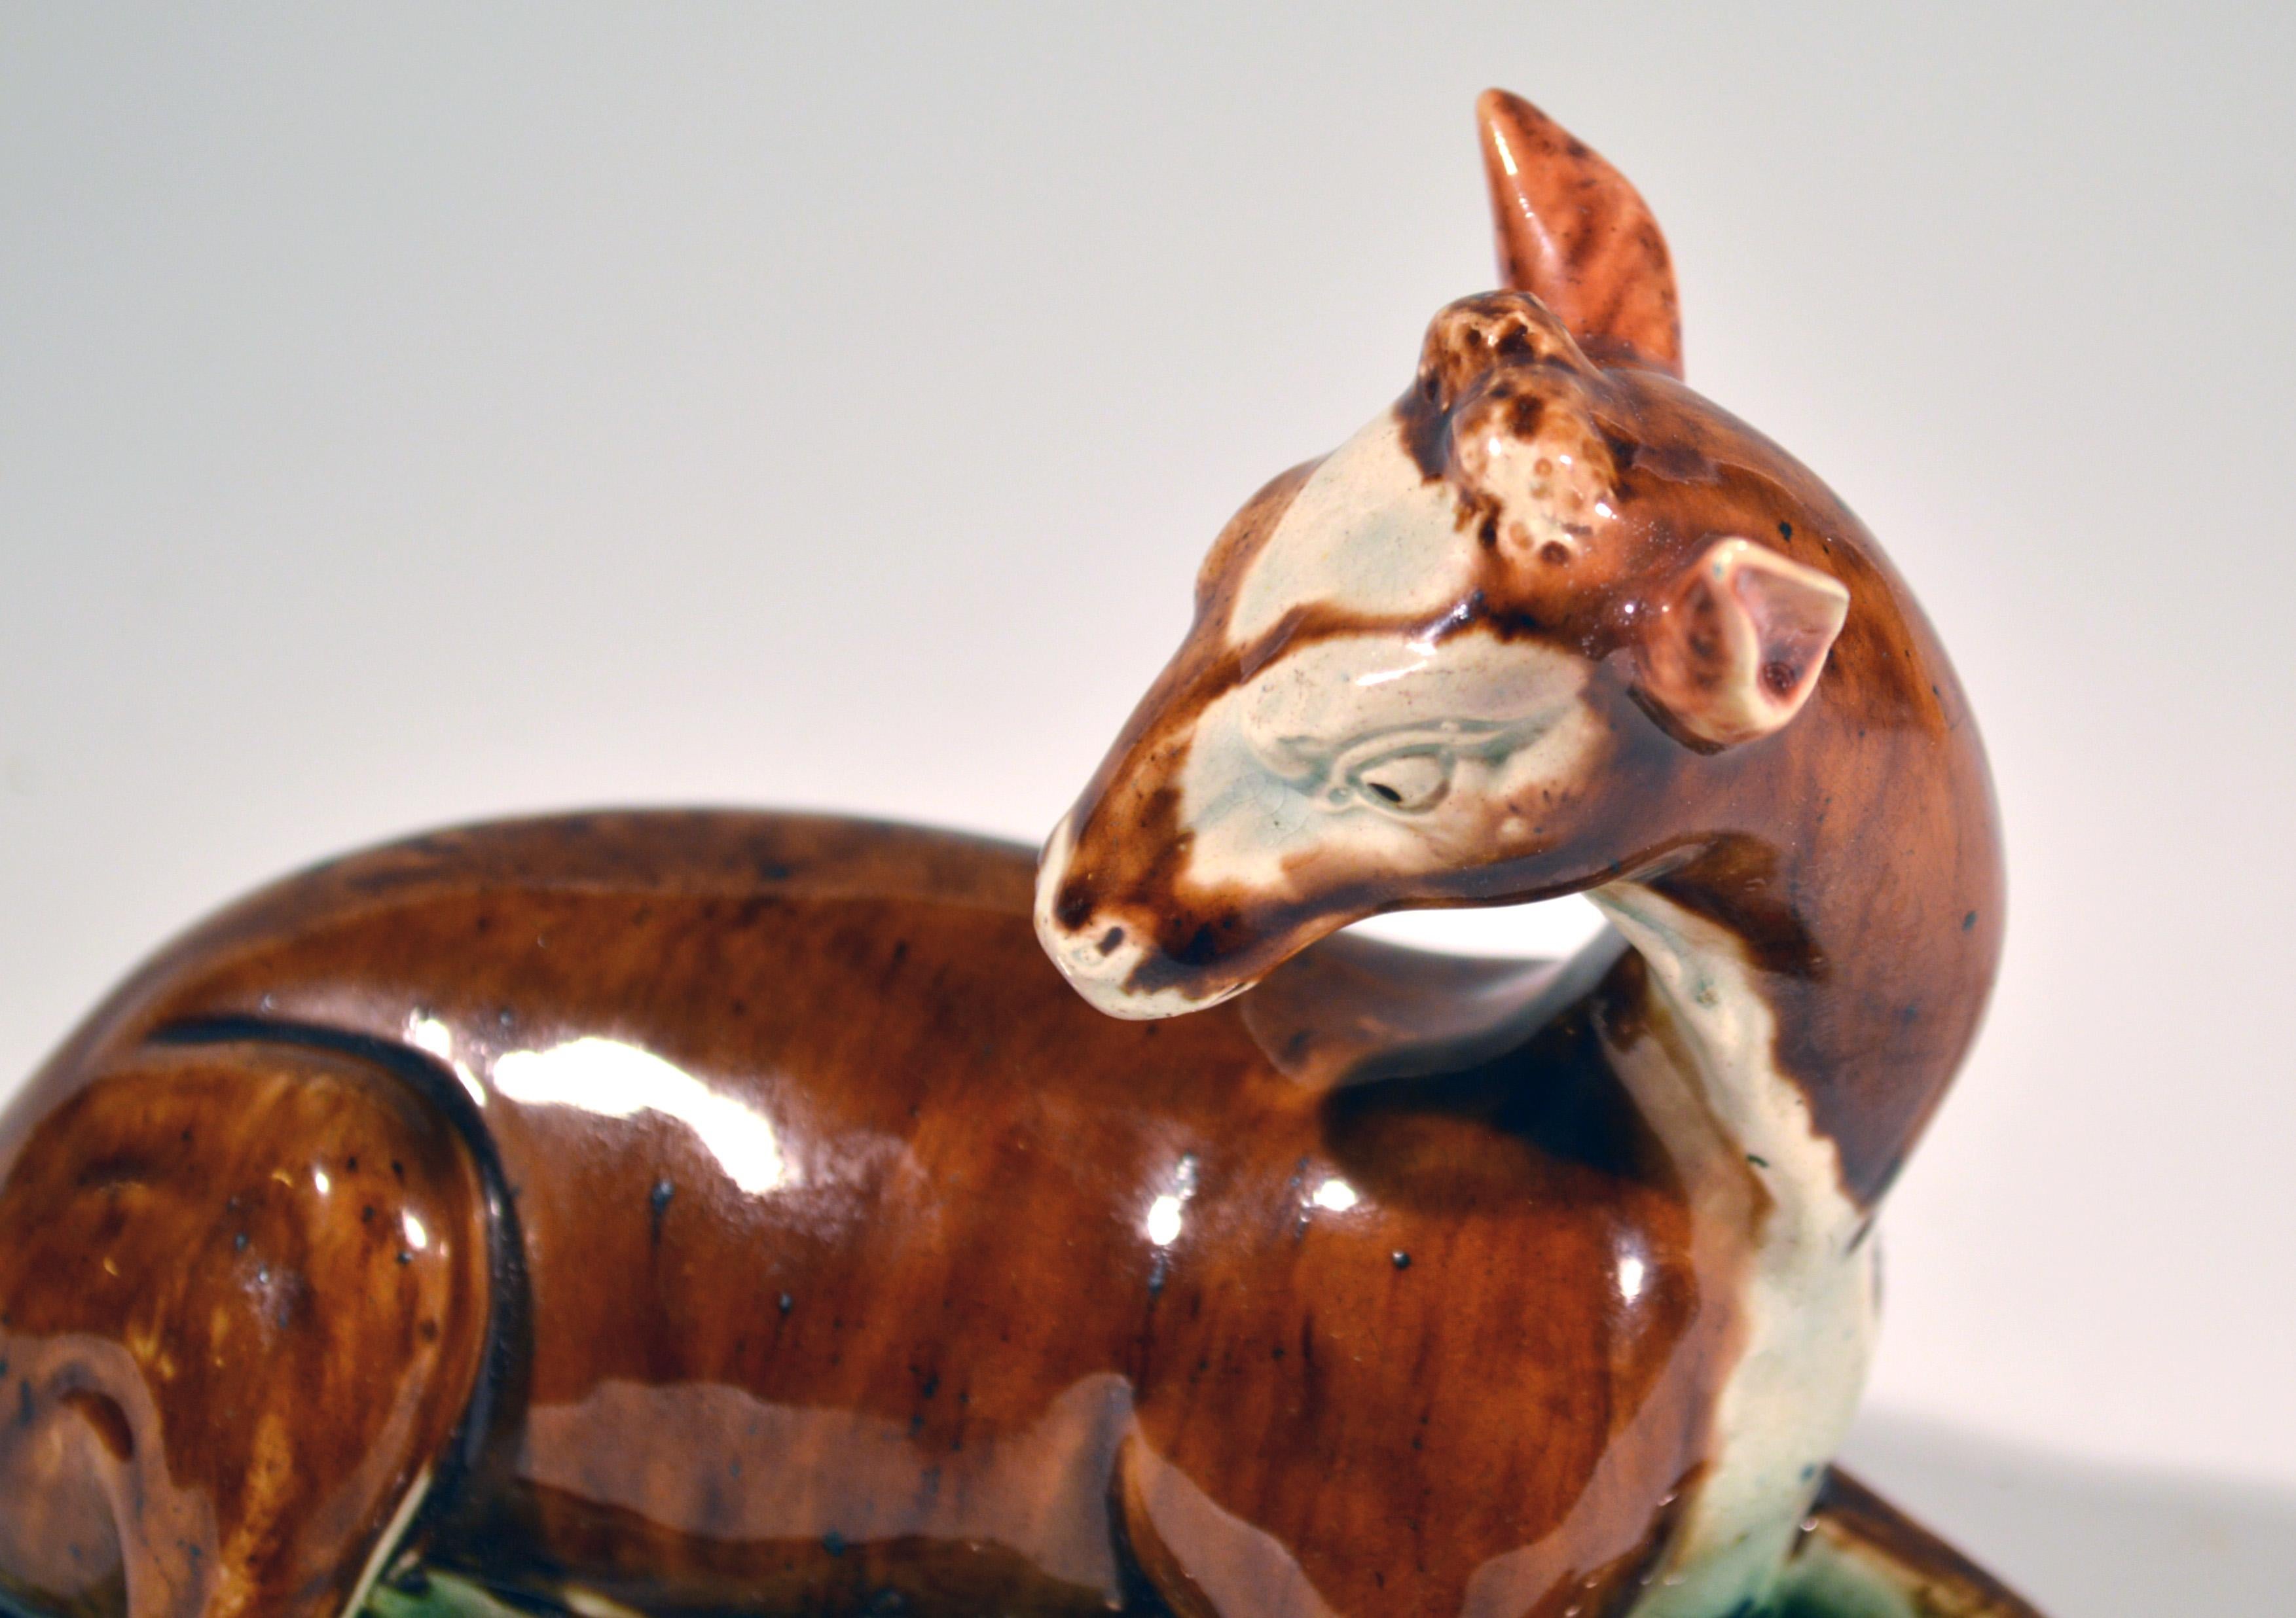 English lead-glazed earthenware model of a Doe at Lodge, 
Wood type,
Perhaps John Wood of Brownhills or Ralph & Enoch Wood of Burslem,
circa 1785

A fine example of this press-moulded model of a doe with a rich deep brown coloration to the